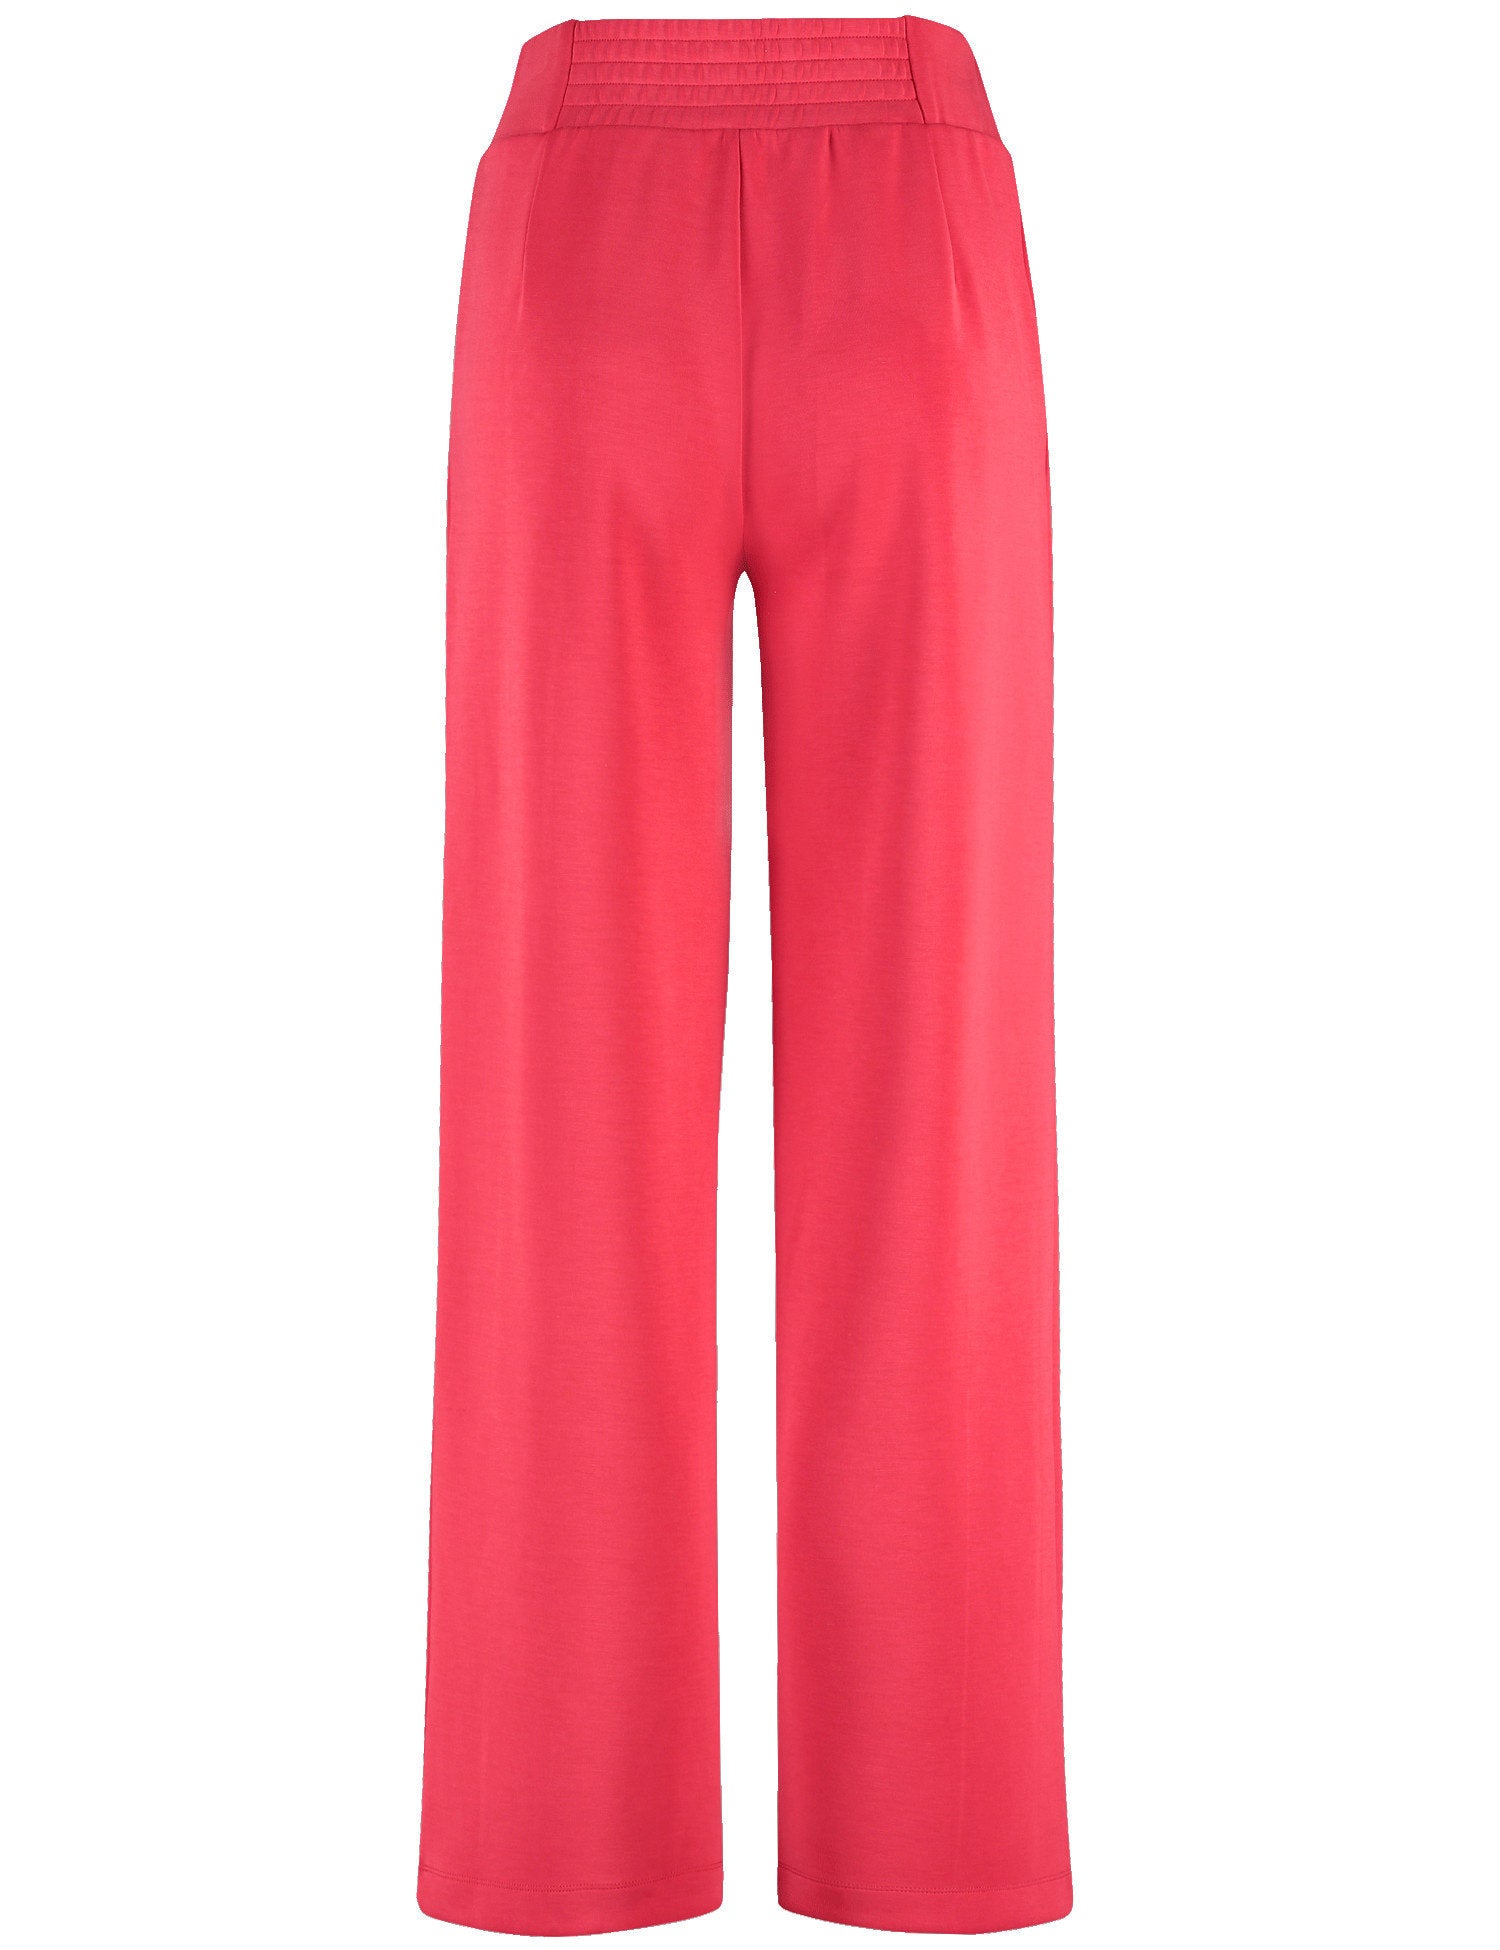 Wide Cloth Trousers With Vertical Pintucks_222188-44020_60140_03